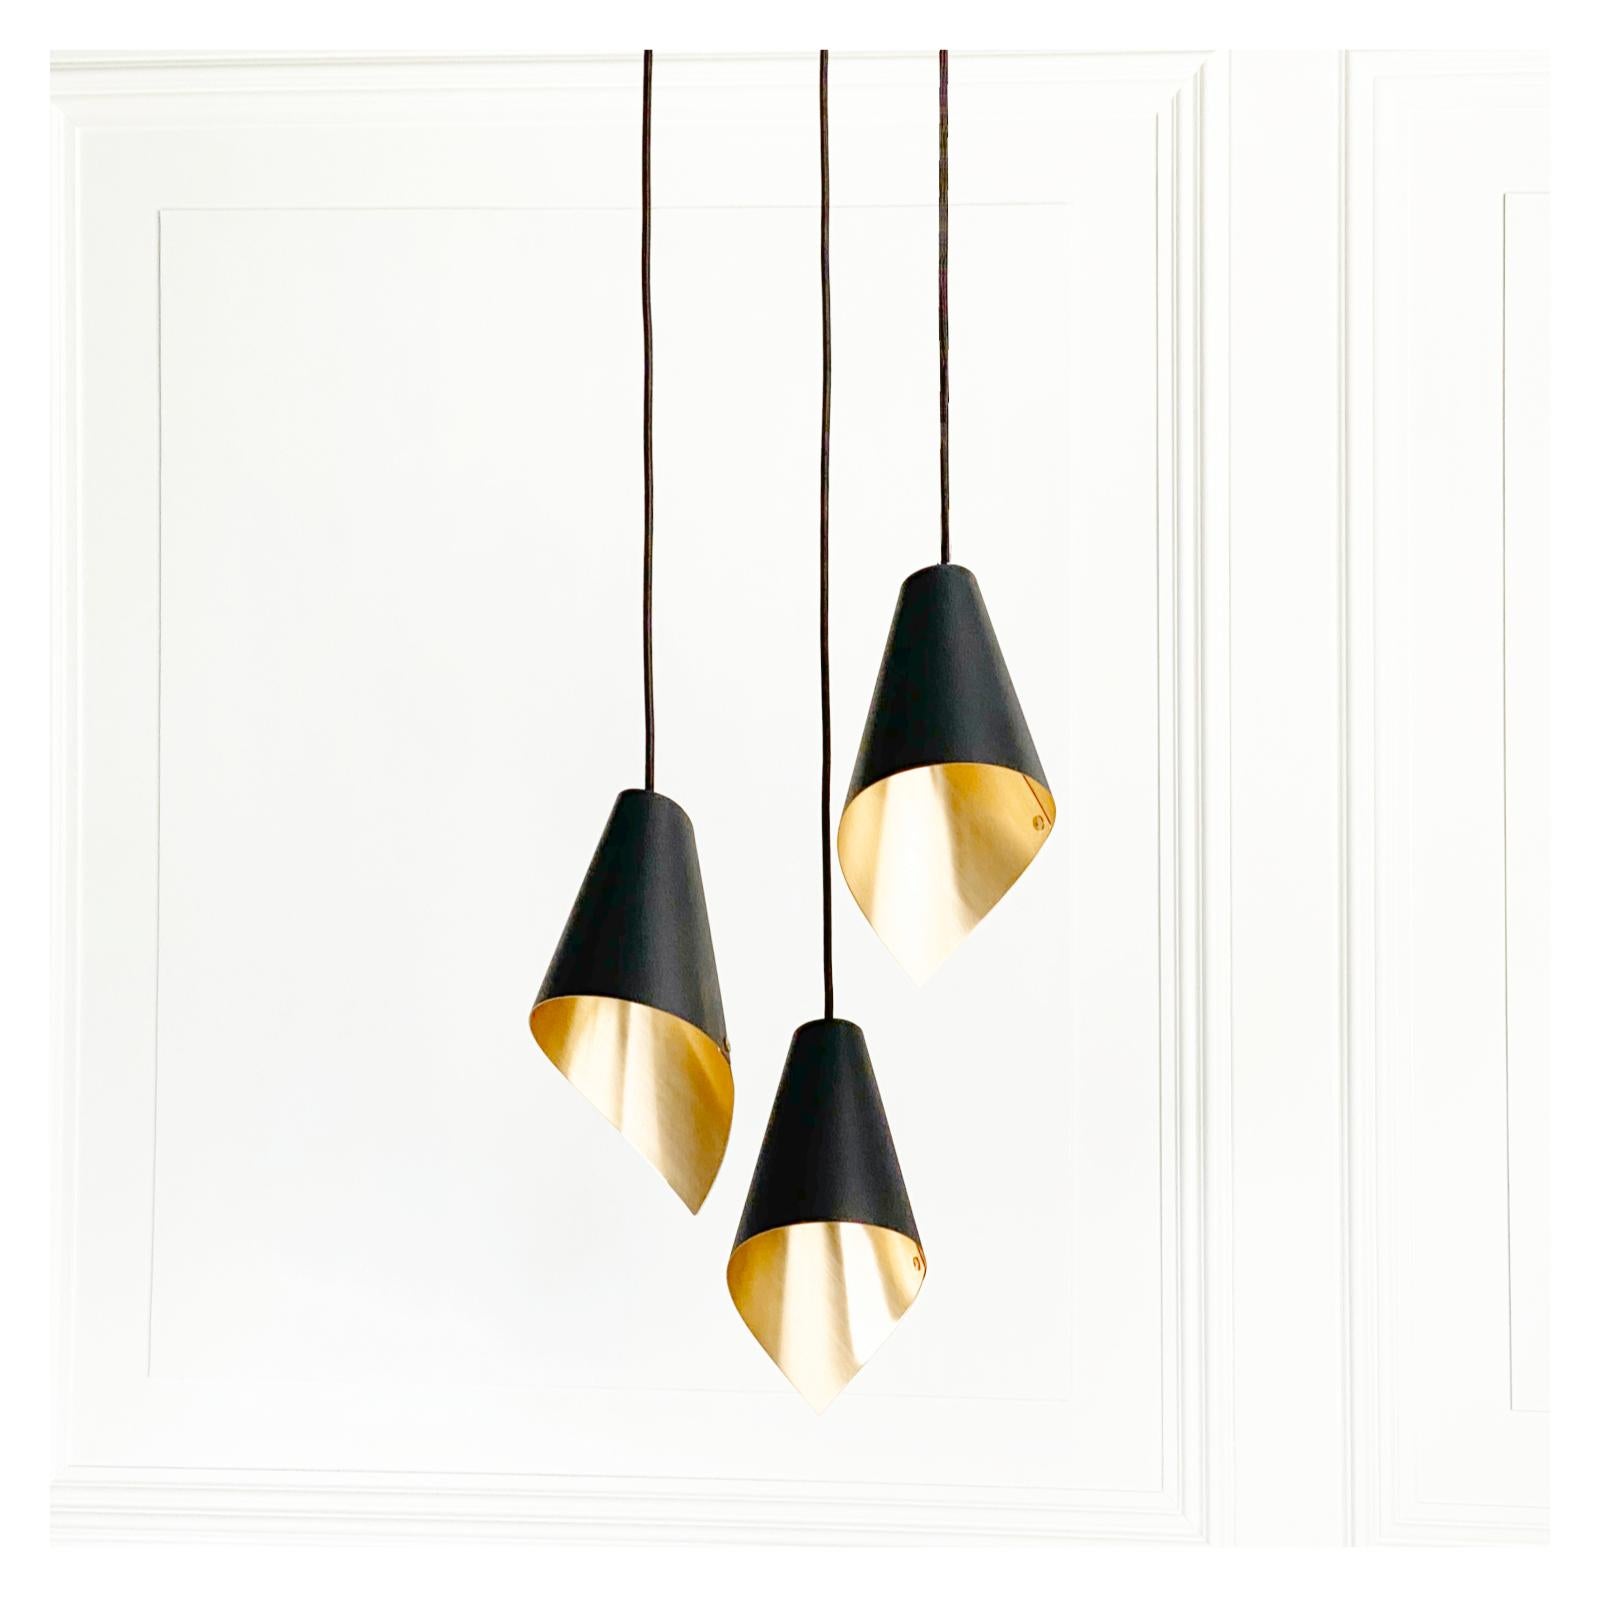 With a black external surface in contrast to its beautiful brushed brass interior, this beautiful ceiling light is from our ‘ARC’ range and can be used in many different configurations to stunning effect. Hang pendant lights in singles or in rows to